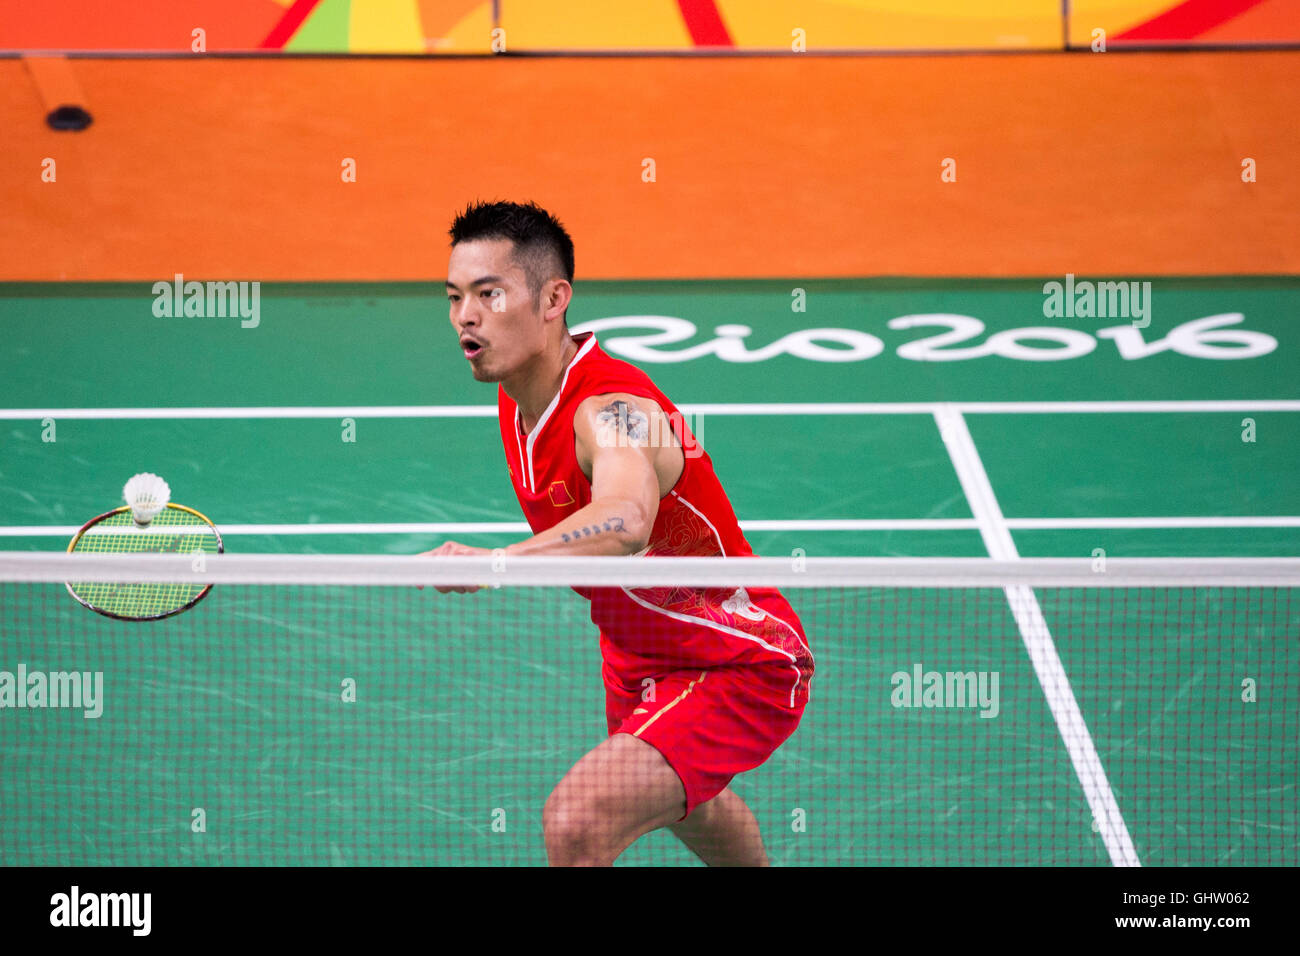 Rio de Janeiro, Brazil. 11th August, 2016. Match between LIN Dan (CHN) and Obernosterer D. (AUT) during the Badminton 2016 Olympics held in Hall 4 Riocentro. NOT AVAILABLE FOR LICENSING IN CHINA (Photo: Celso Pupo/Fotoarena) Credit:  Foto Arena LTDA/Alamy Live News Stock Photo